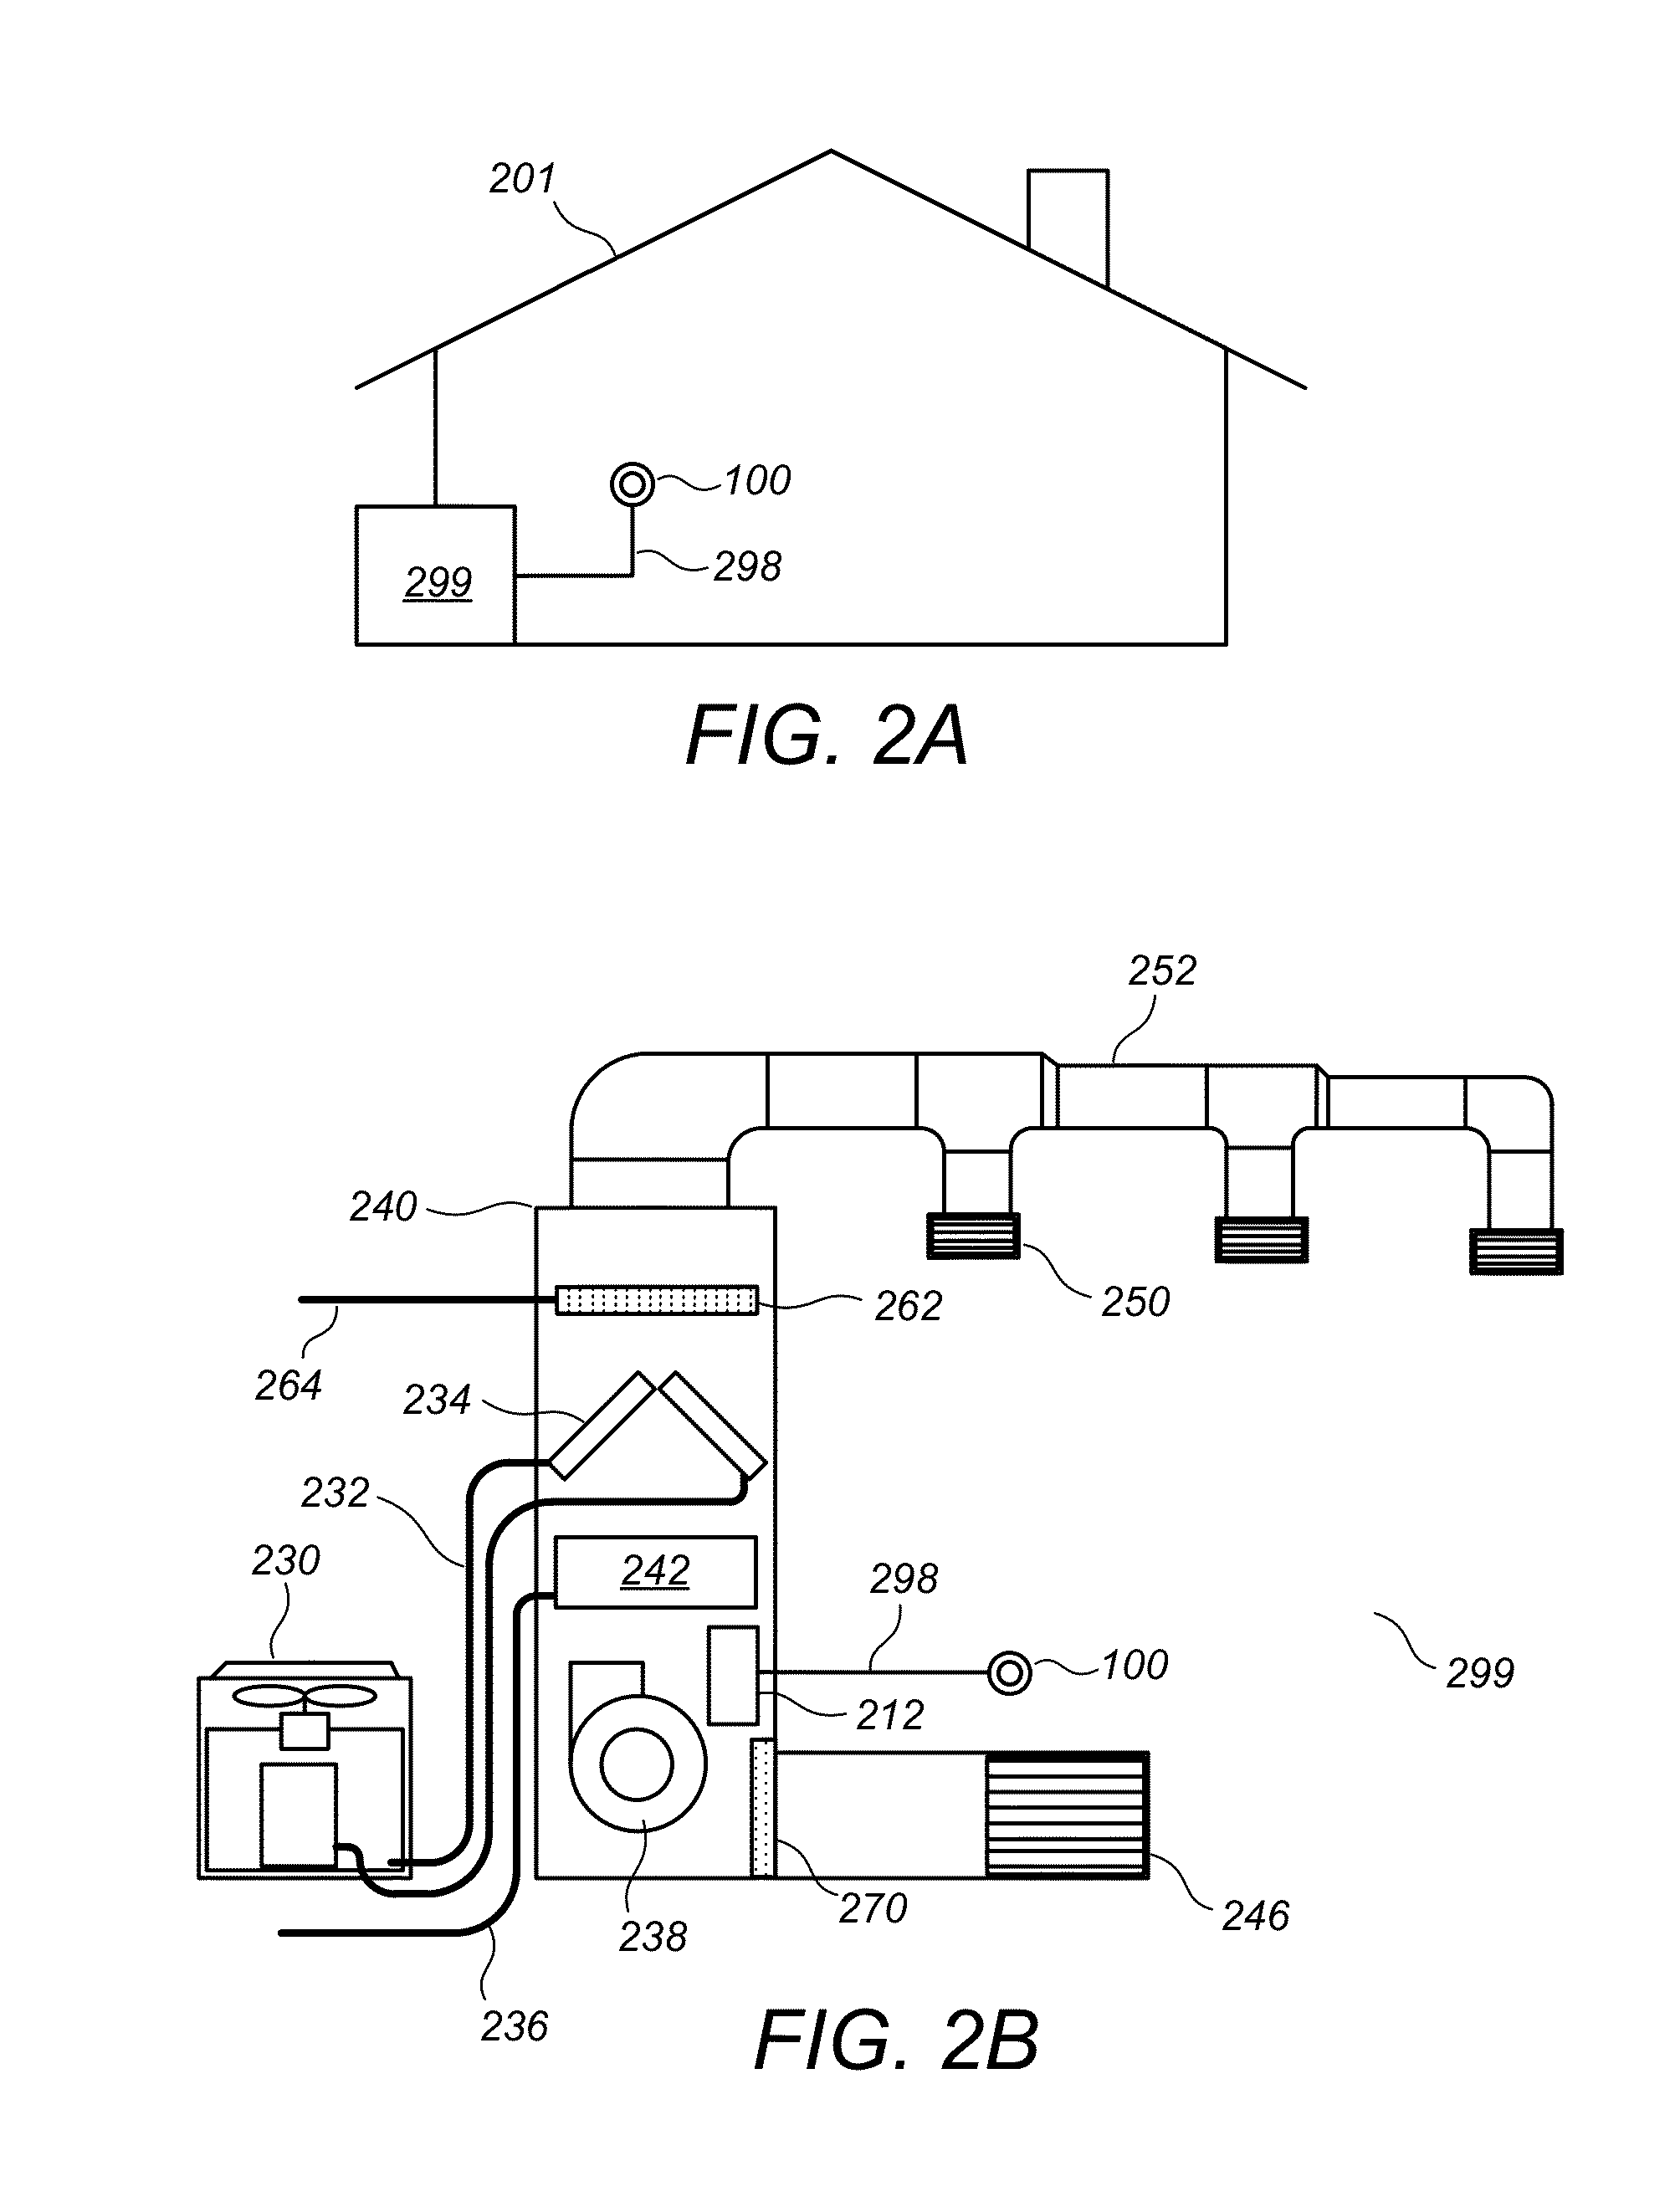 User-friendly, network connected learning thermostat and related systems and methods